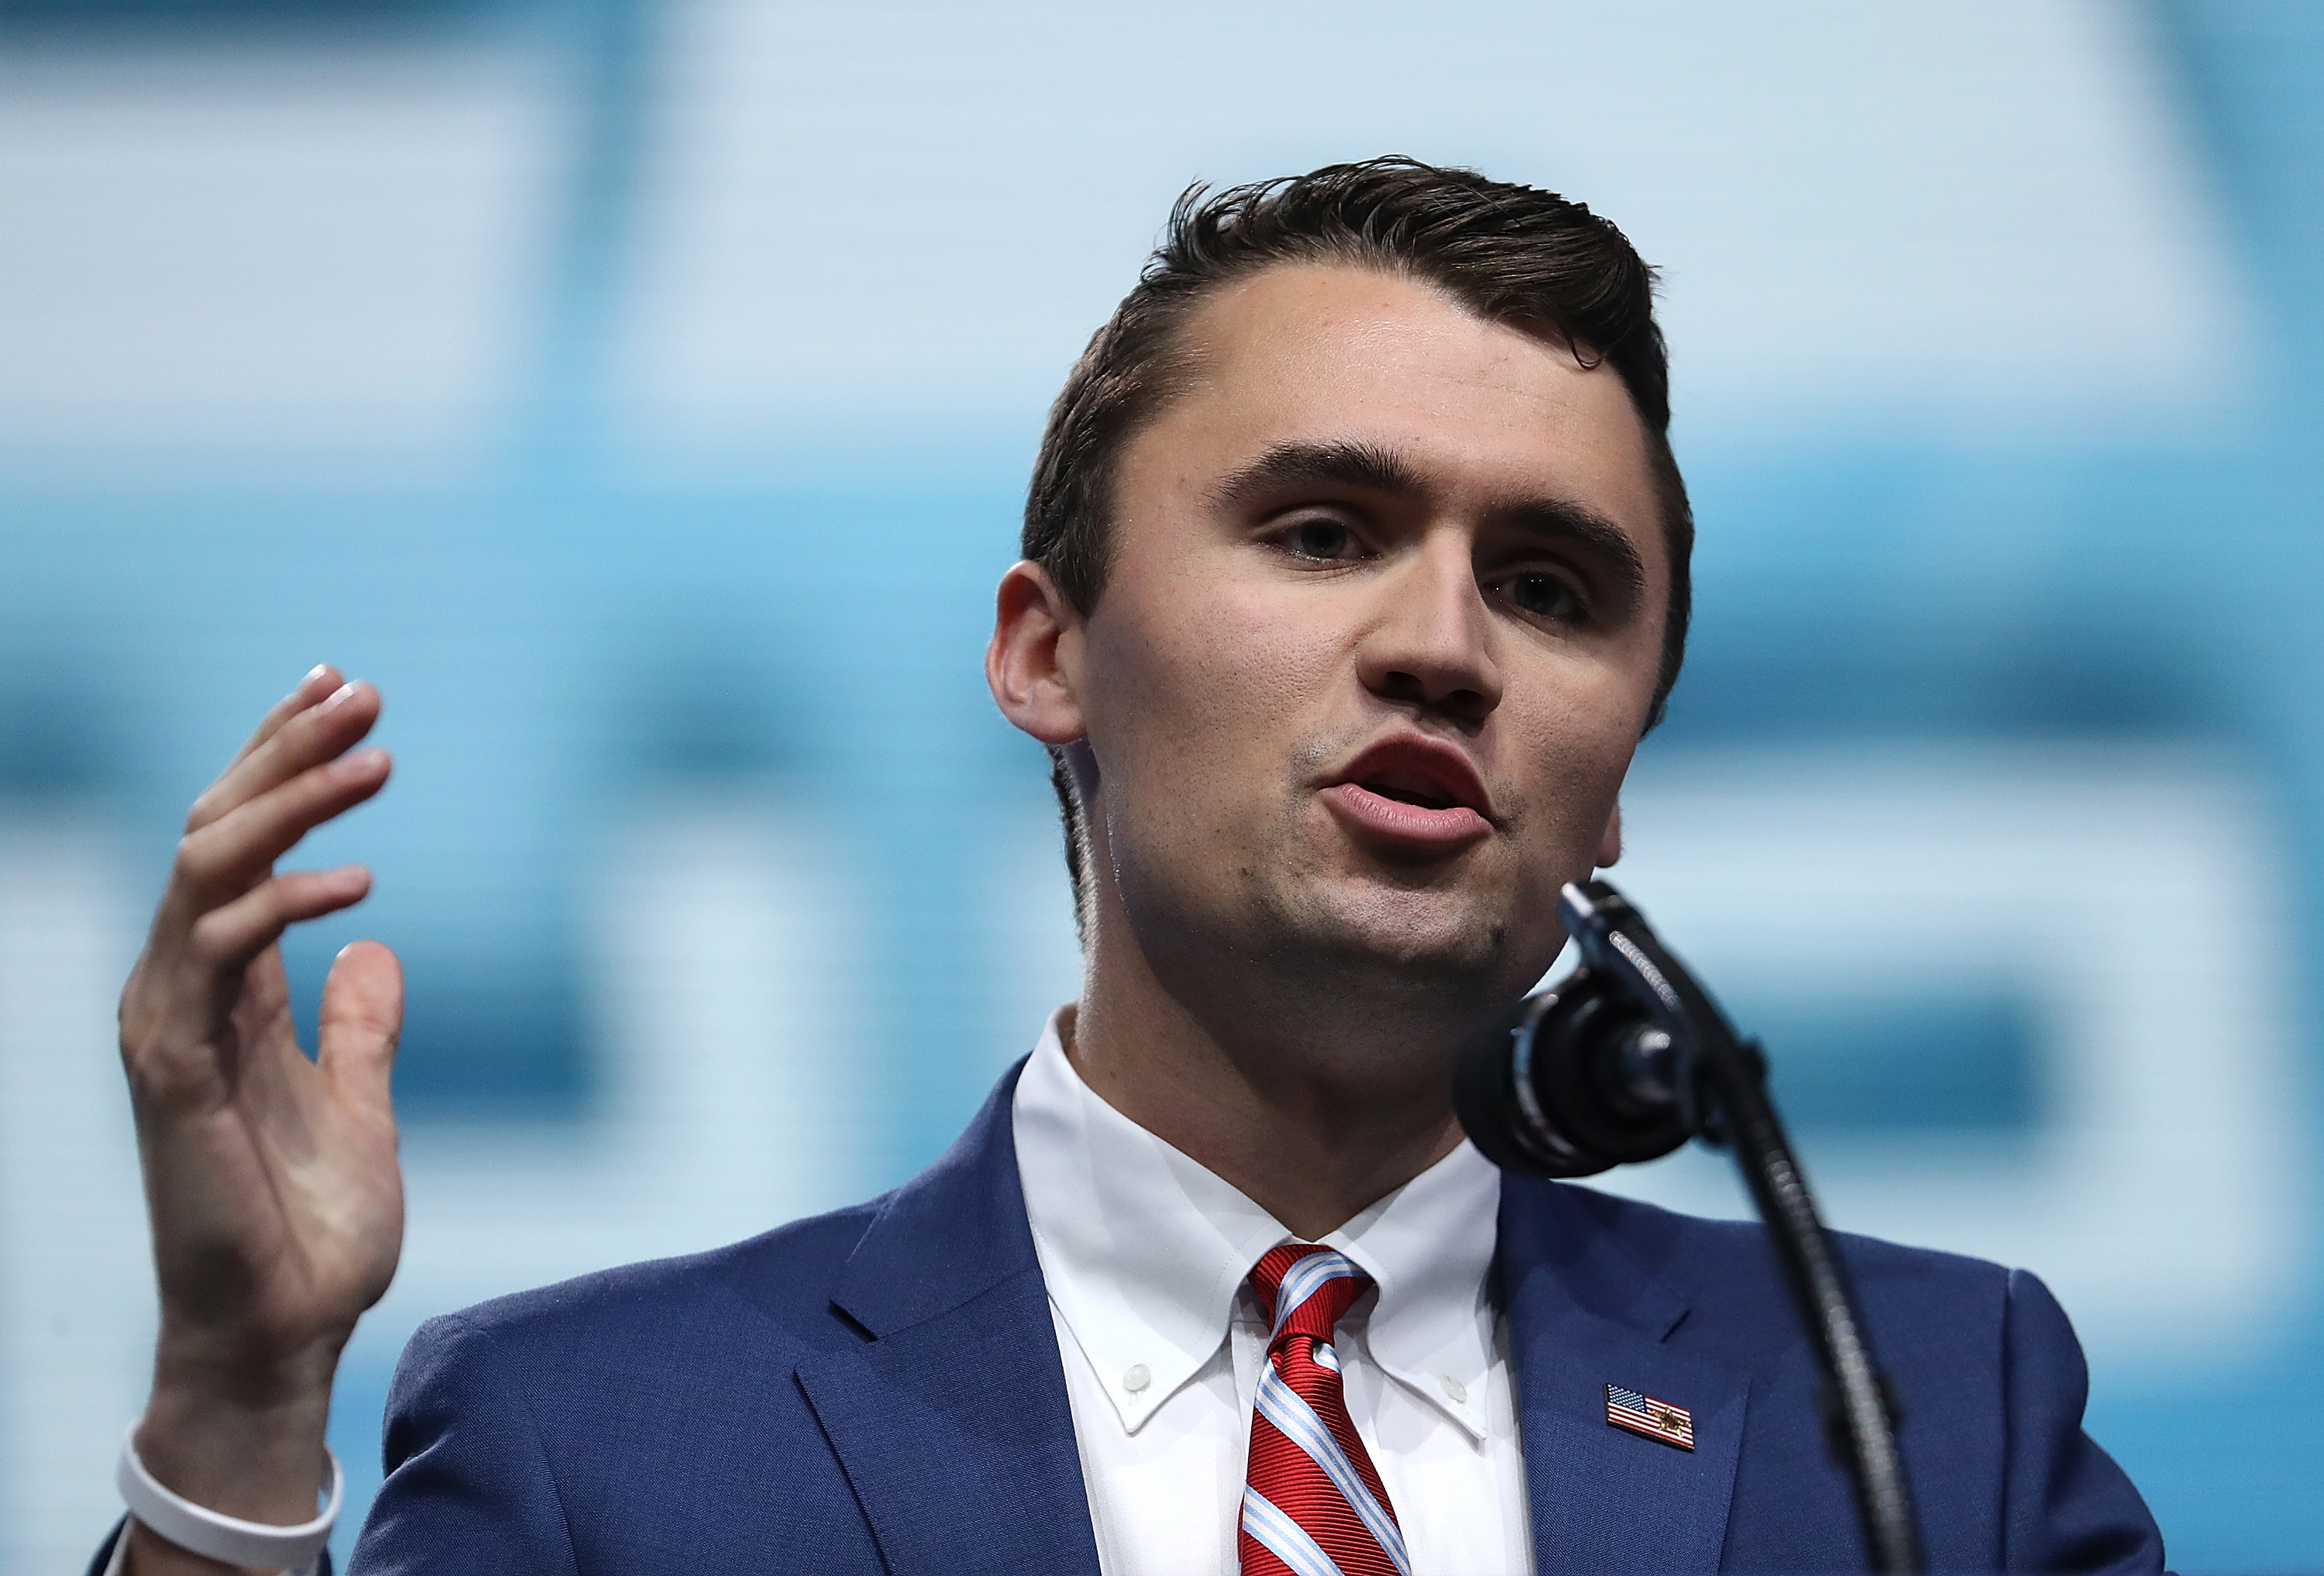 Charlie Kirk Tells Antifa to Occasion Extra After Indignant Faculty Protest